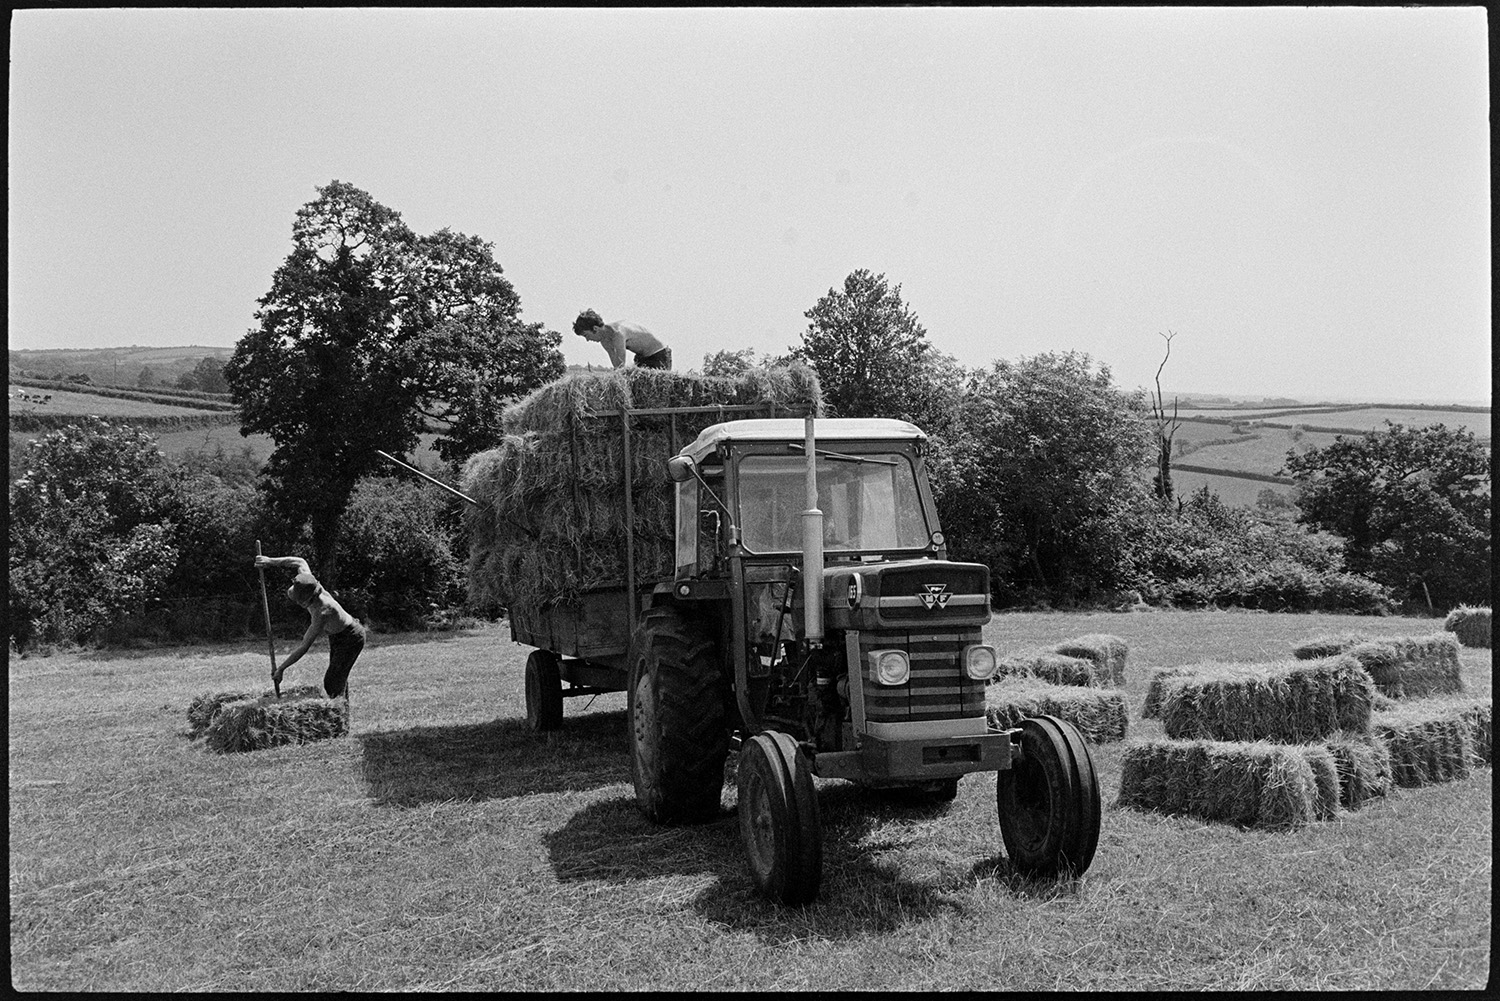 David Ward and Graham Ward loading hay bales onto a tractor and trailer in a field at Parsonage, Iddesleigh. One of the men is picking up a bale with a pitchfork. More bales can be seen in the field in the background.